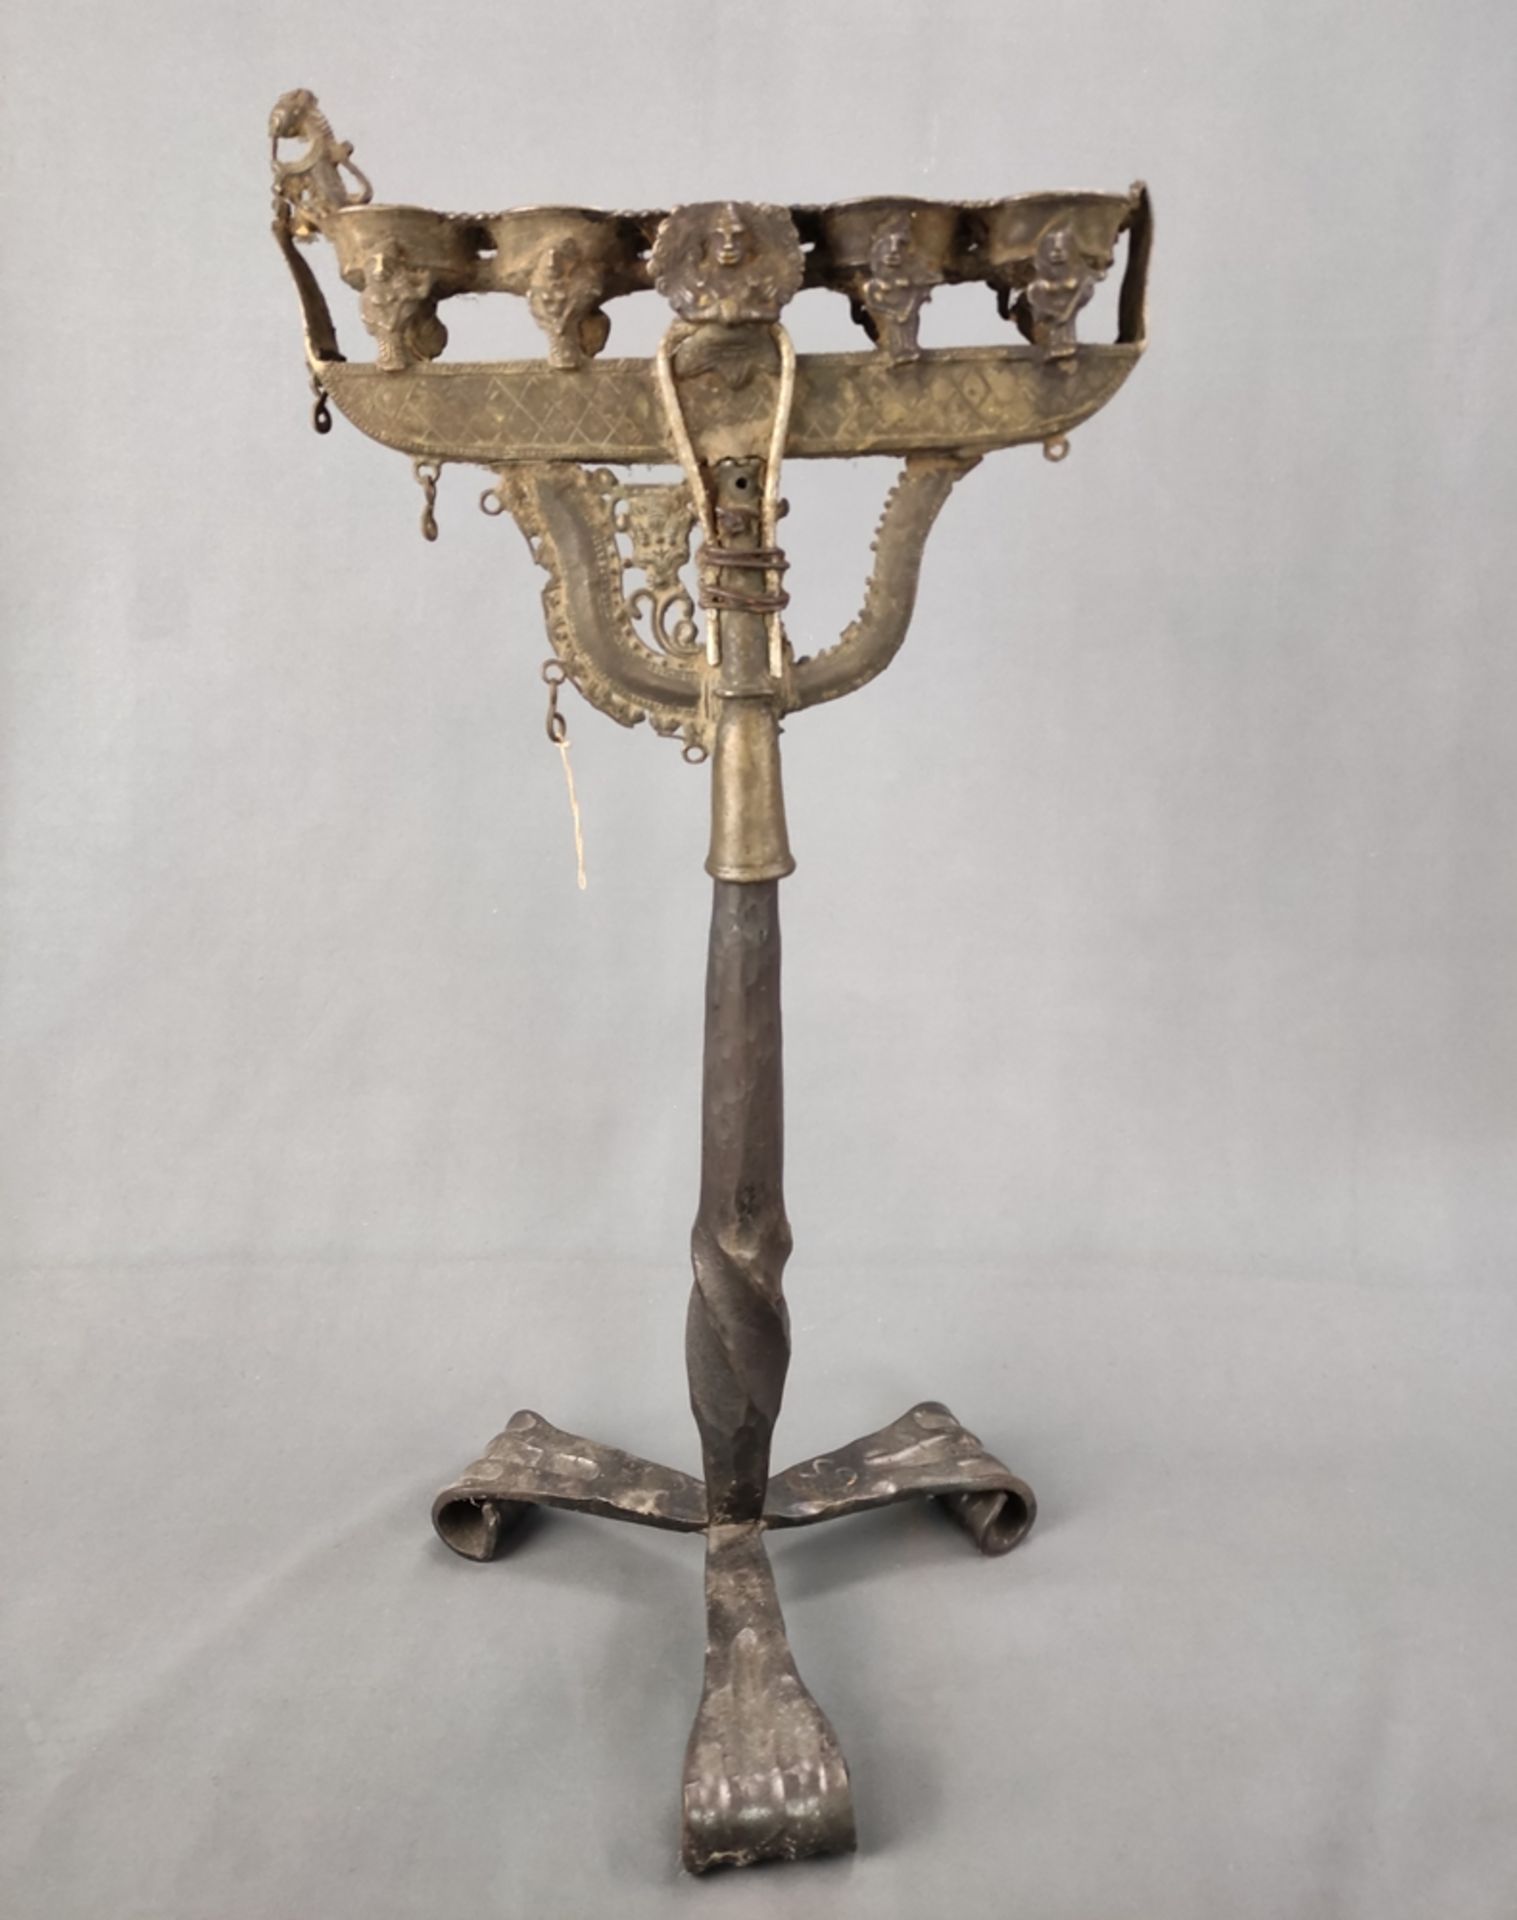 Antique oil candlestick, joined in two parts (not belonging together), 5 flames, small bowls for oil